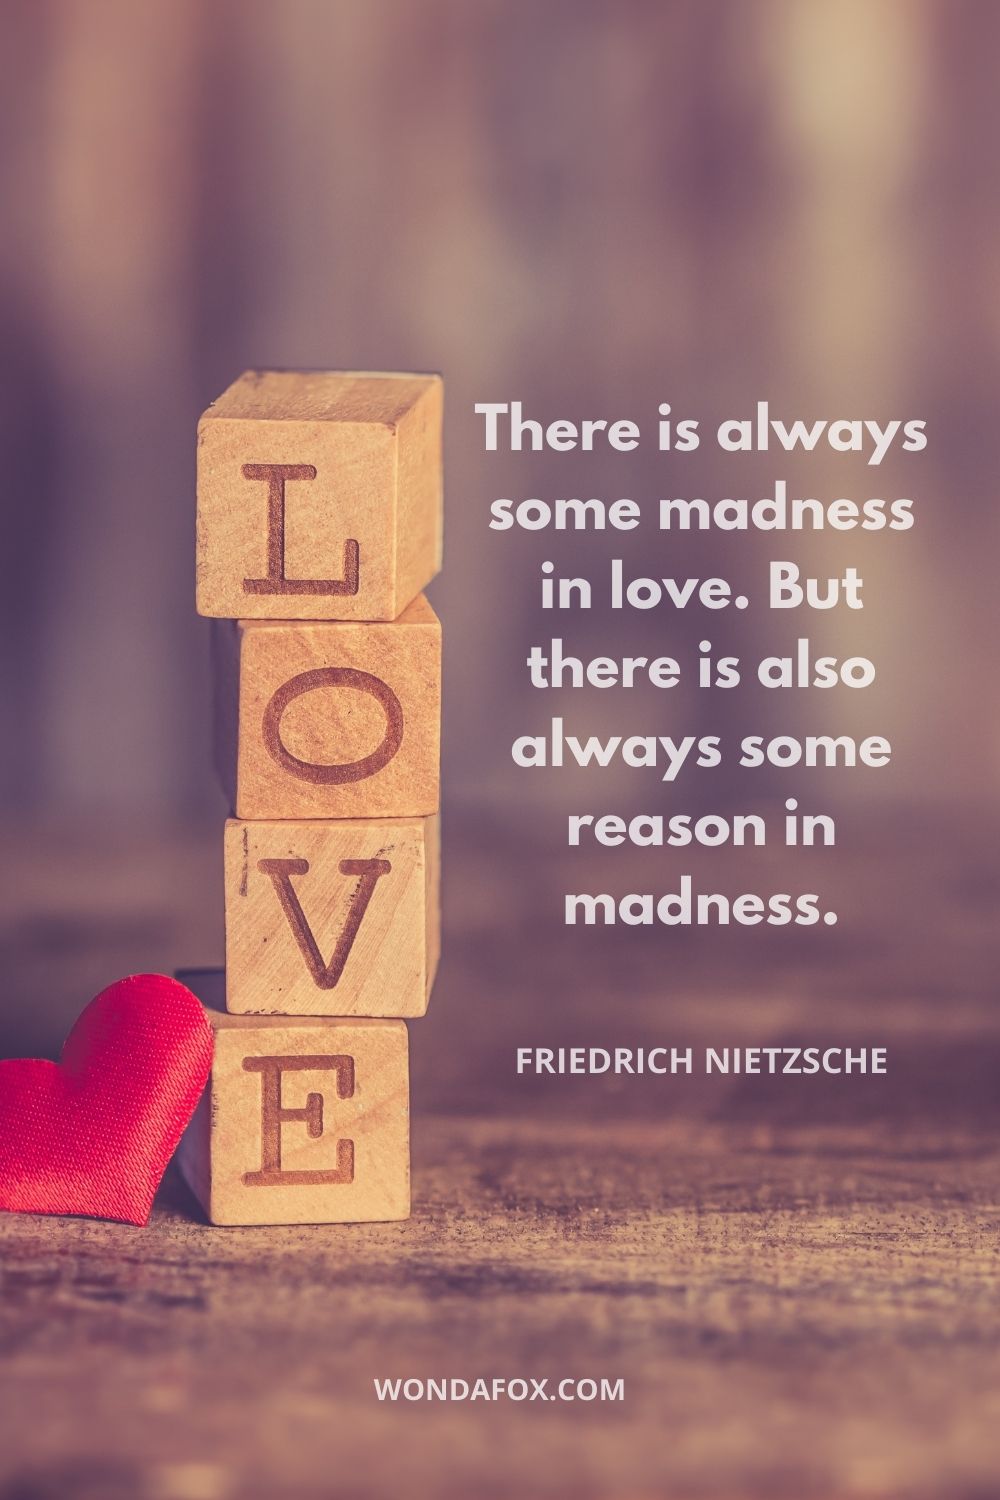 There is always some madness in love. But there is also always some reason in madness.